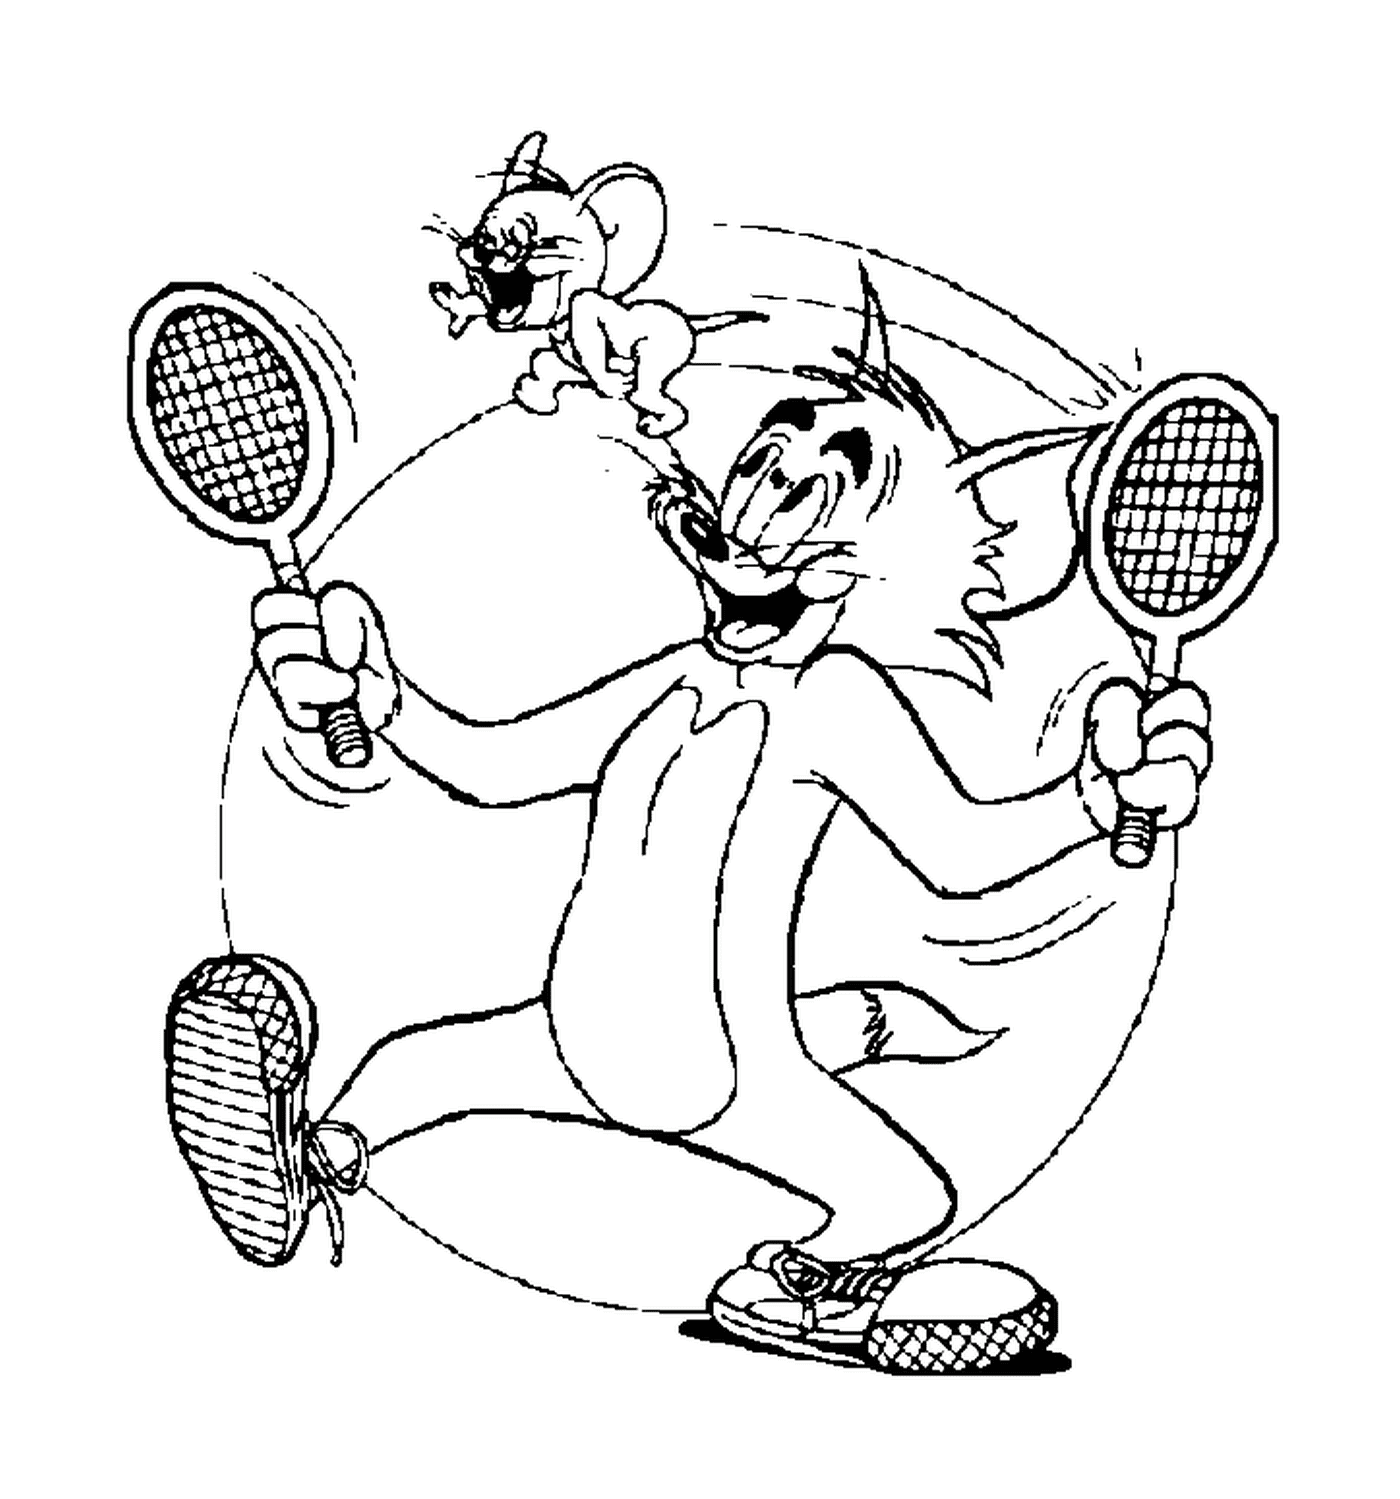  Tom and Jerry play tennis 